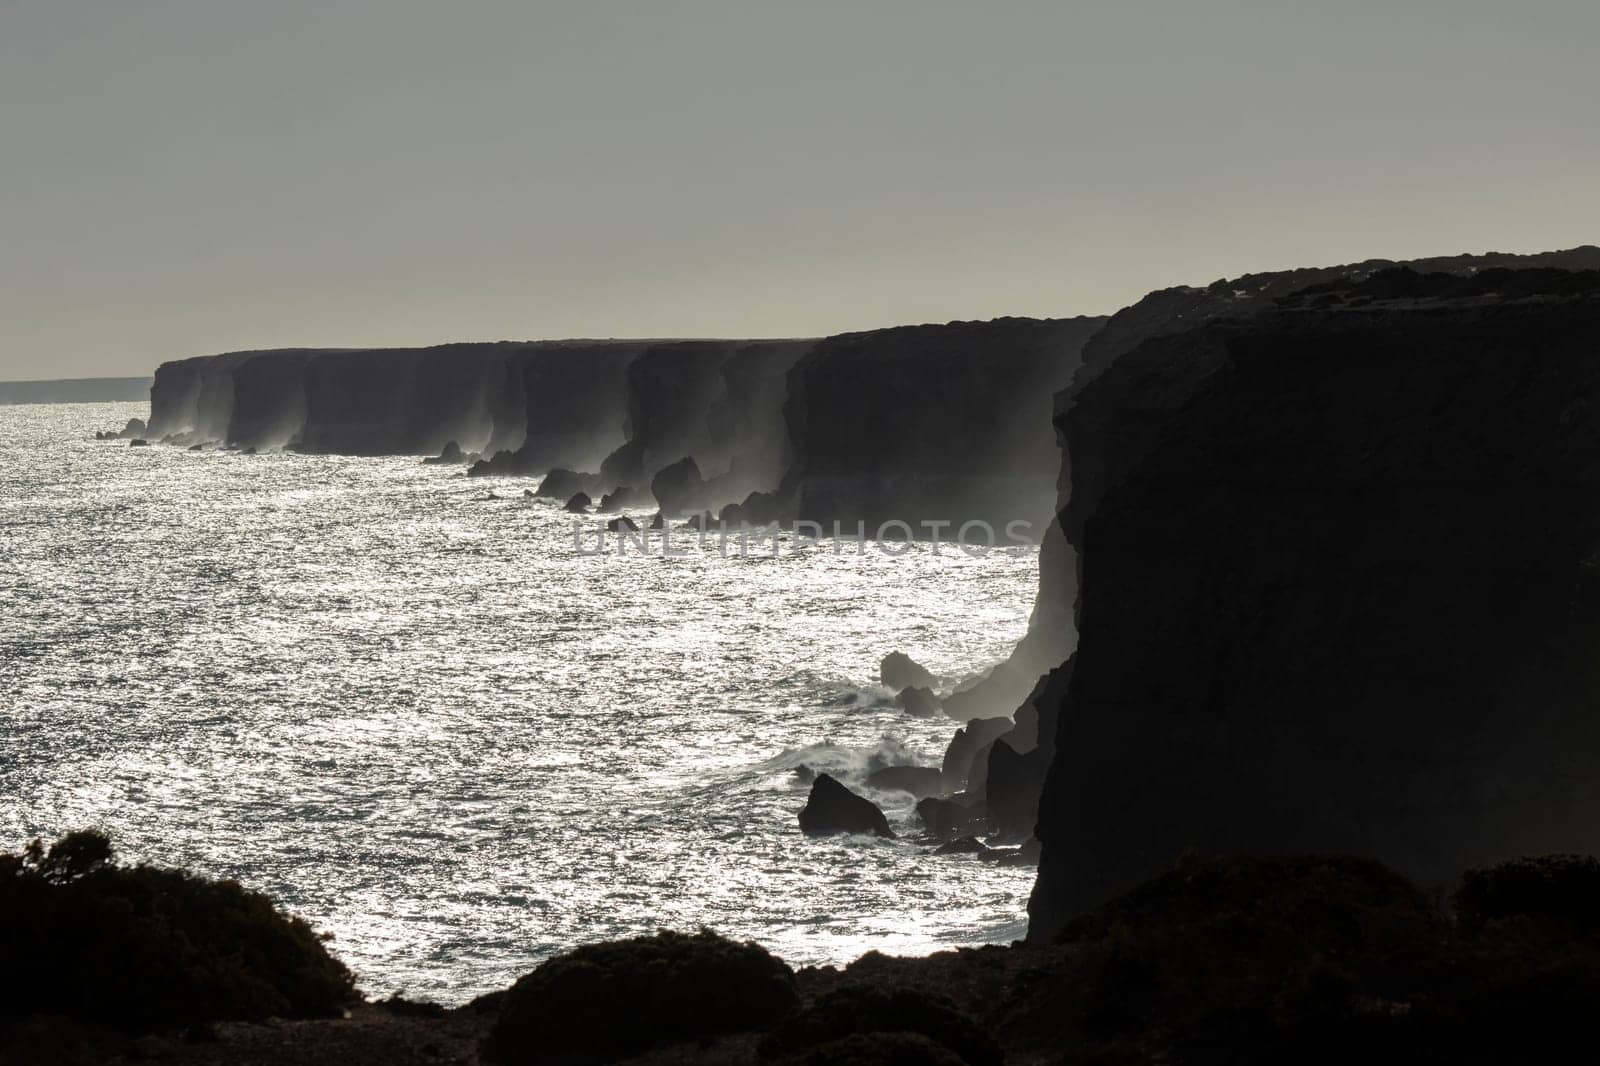 Dramatic shot of the iconic Nullarbor cliffs silhouetted at sunset by StefanMal